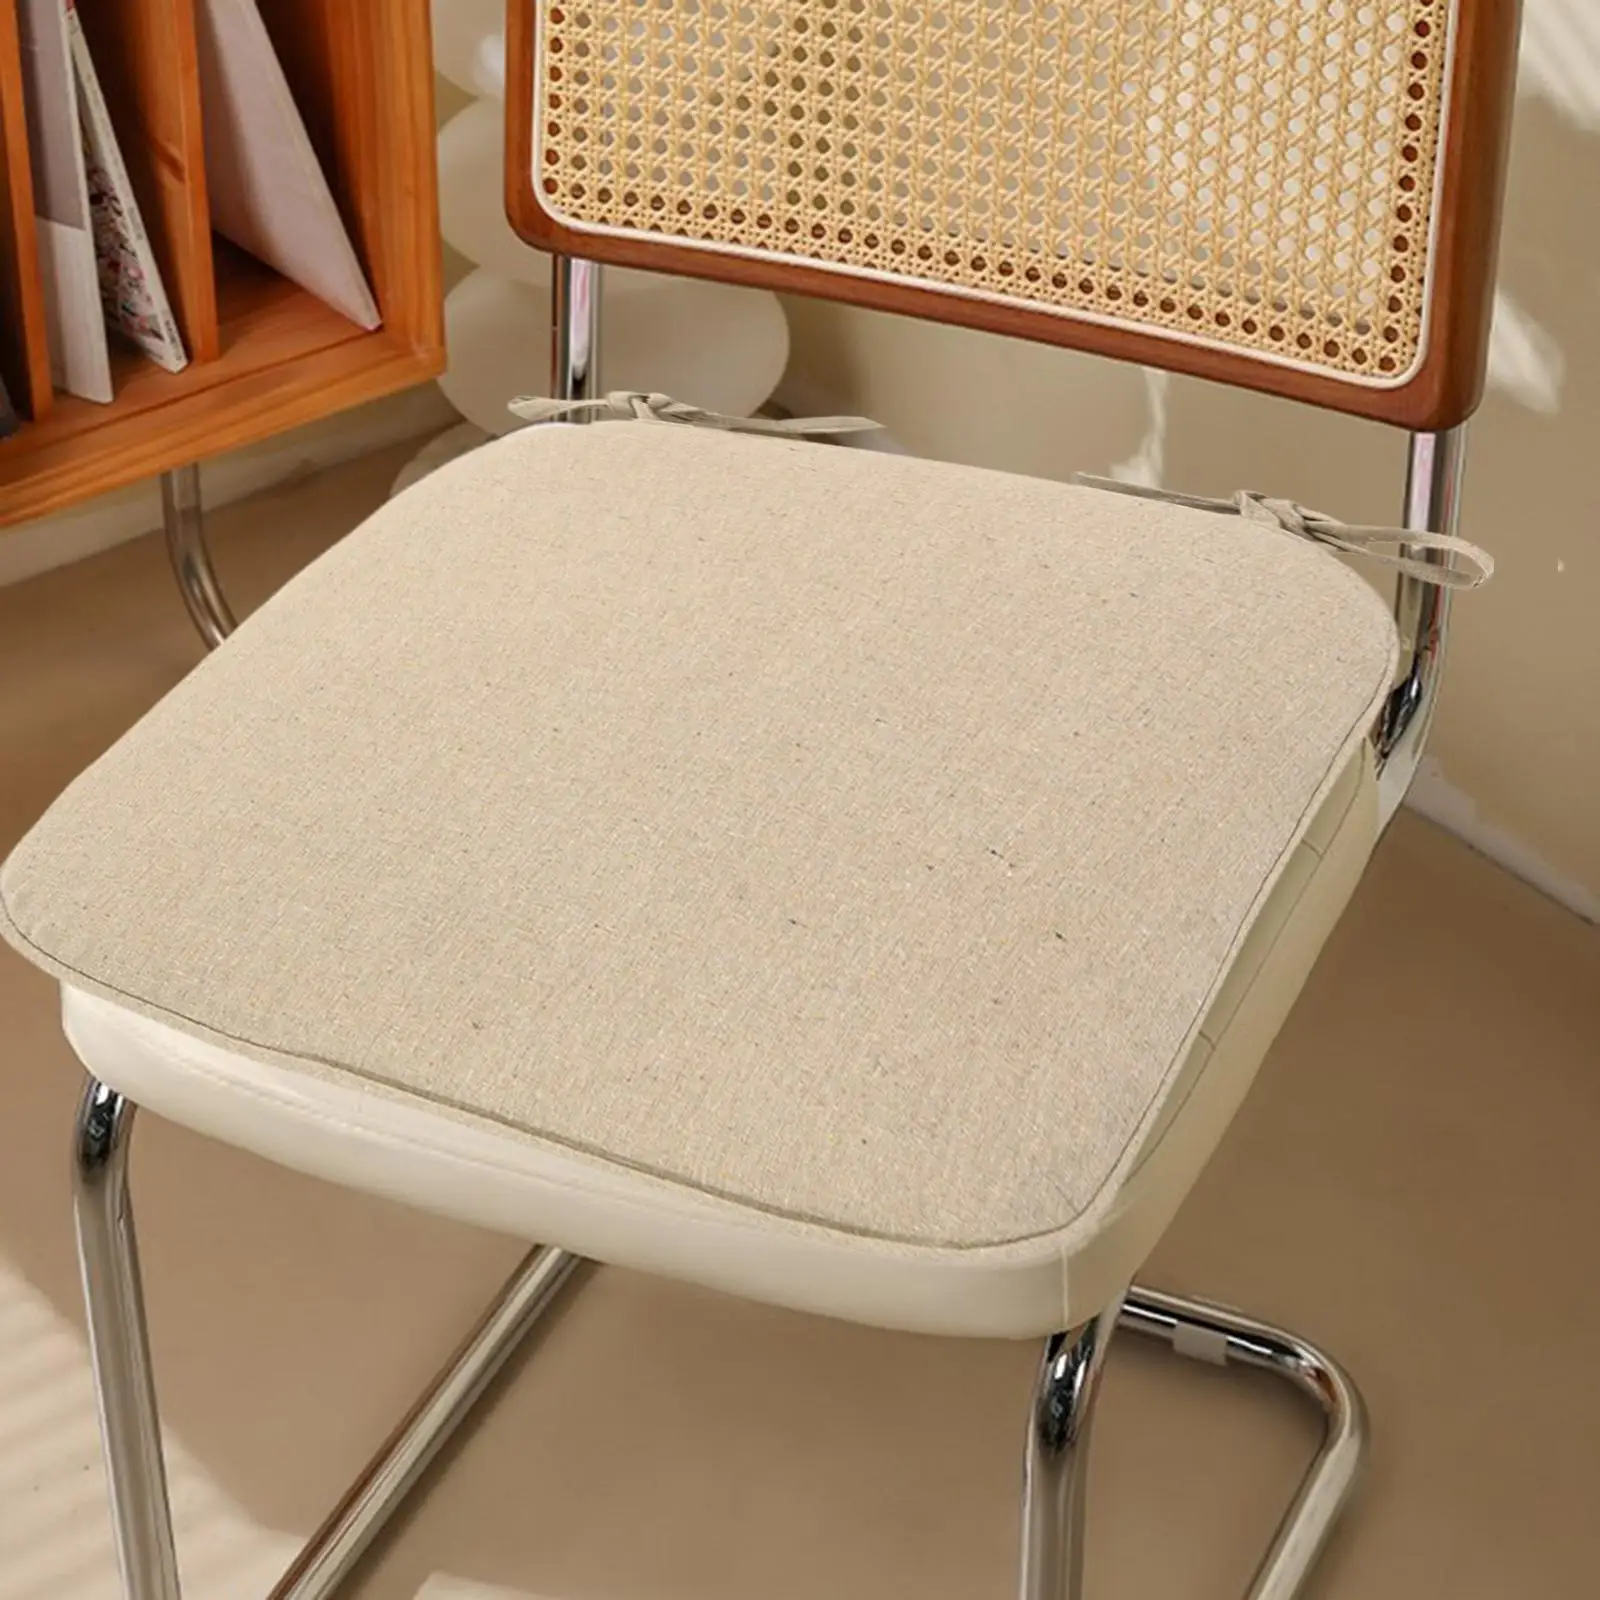 Chair Pad Removable Comfortable Dining Chair Cushion Dining Chair Seat Pad for Home Office Chair Dining Room Balcony